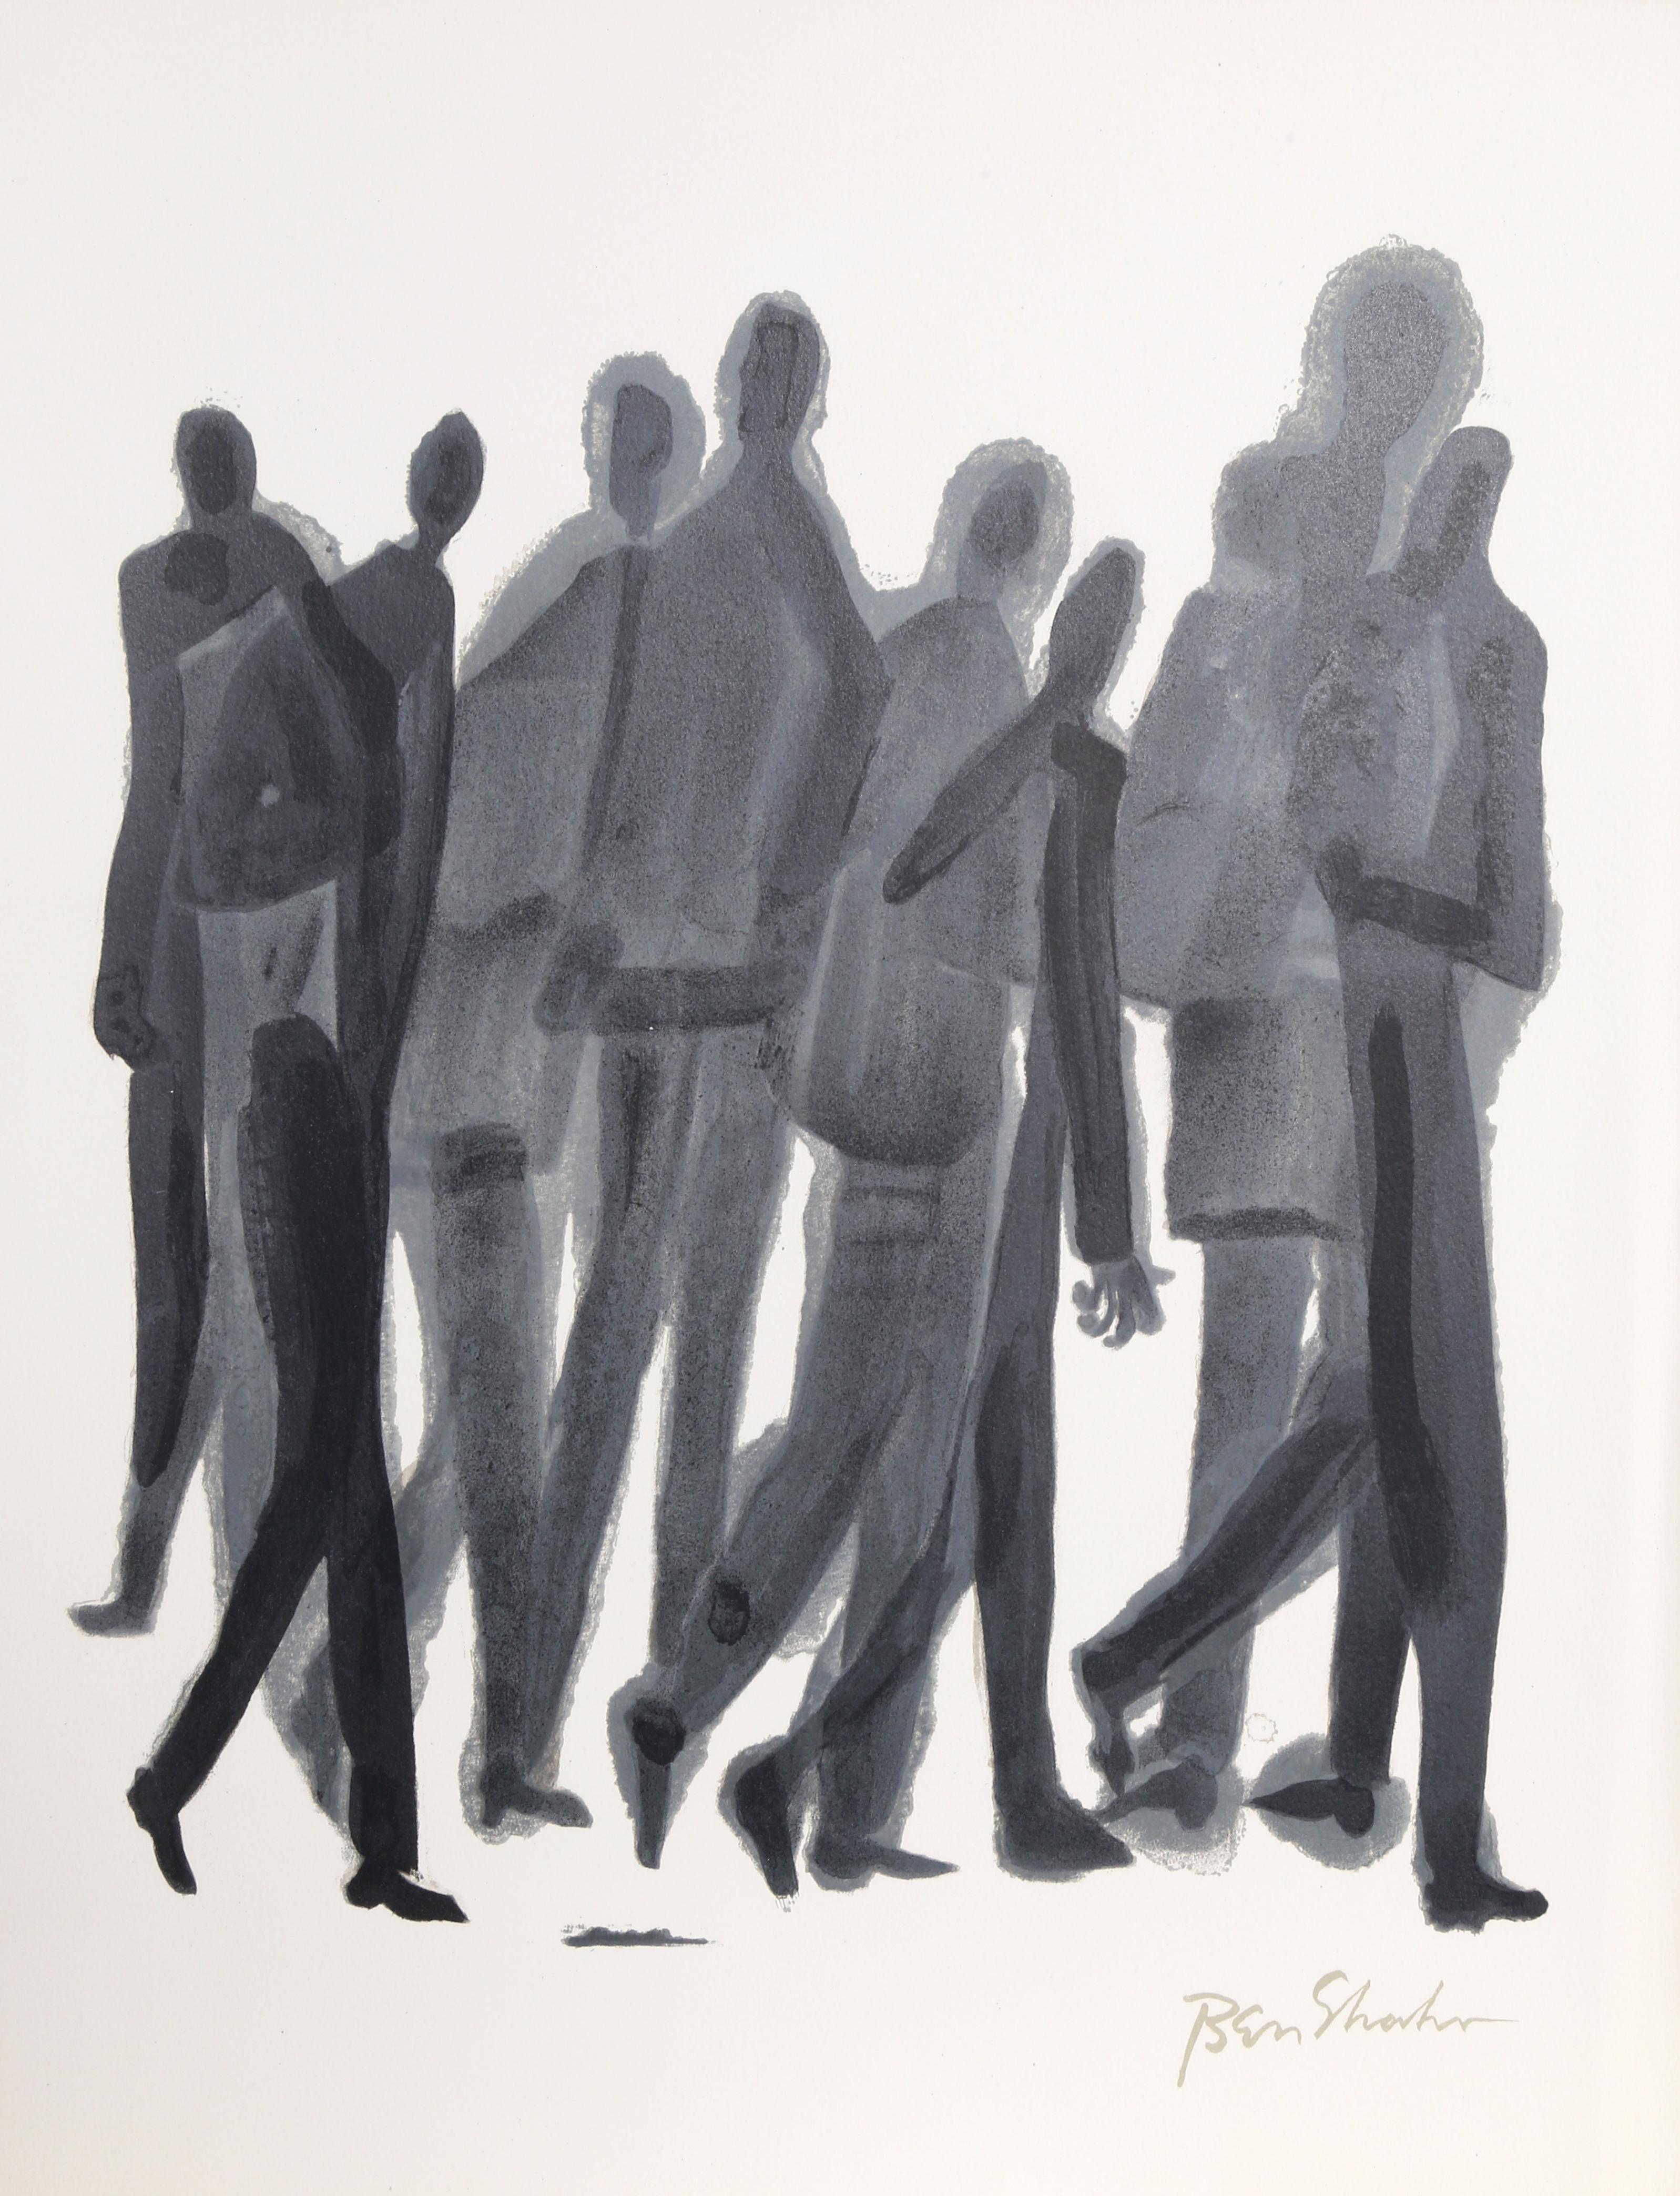 Artist: Ben Shahn, Lithuanian/American (1898 - 1969)
Title: Many Men from the Rilke Portfolio
Year: 1968
Medium: Lithograph on Richard de Bas, signed in the plate
Edition Size: 750
Size: 22.5 x 17.75 in. (57.15 x 45.09 cm)

Printer: Atelier Mourlot,